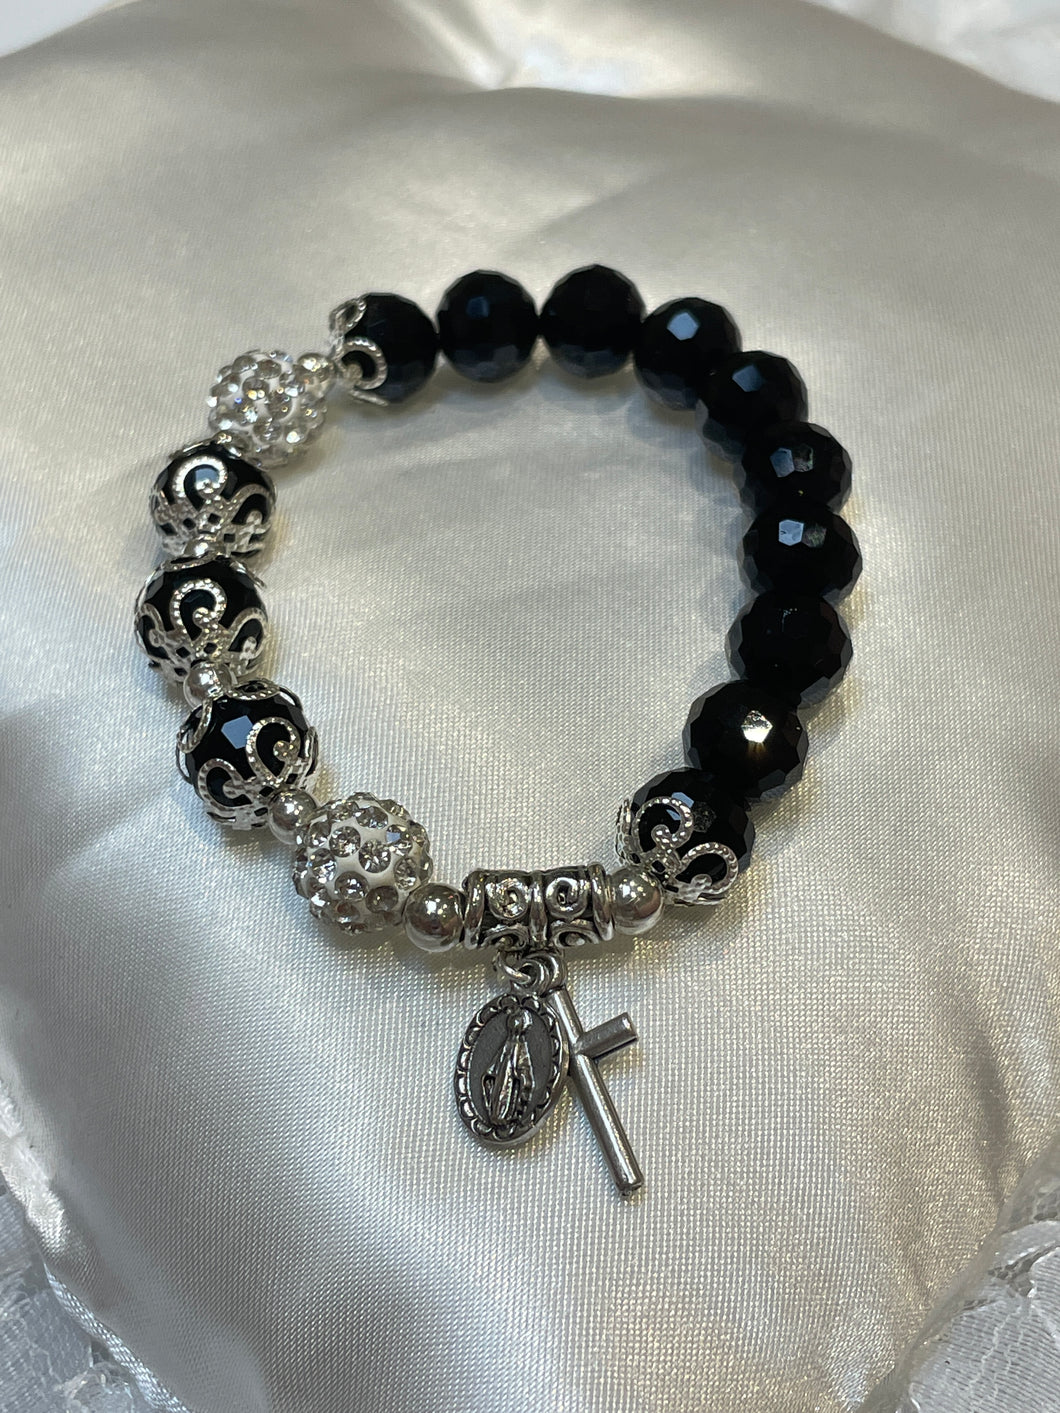 Black and Silver Gemstone Rosary Bracelet with Miraculous Medal and Cross Charms